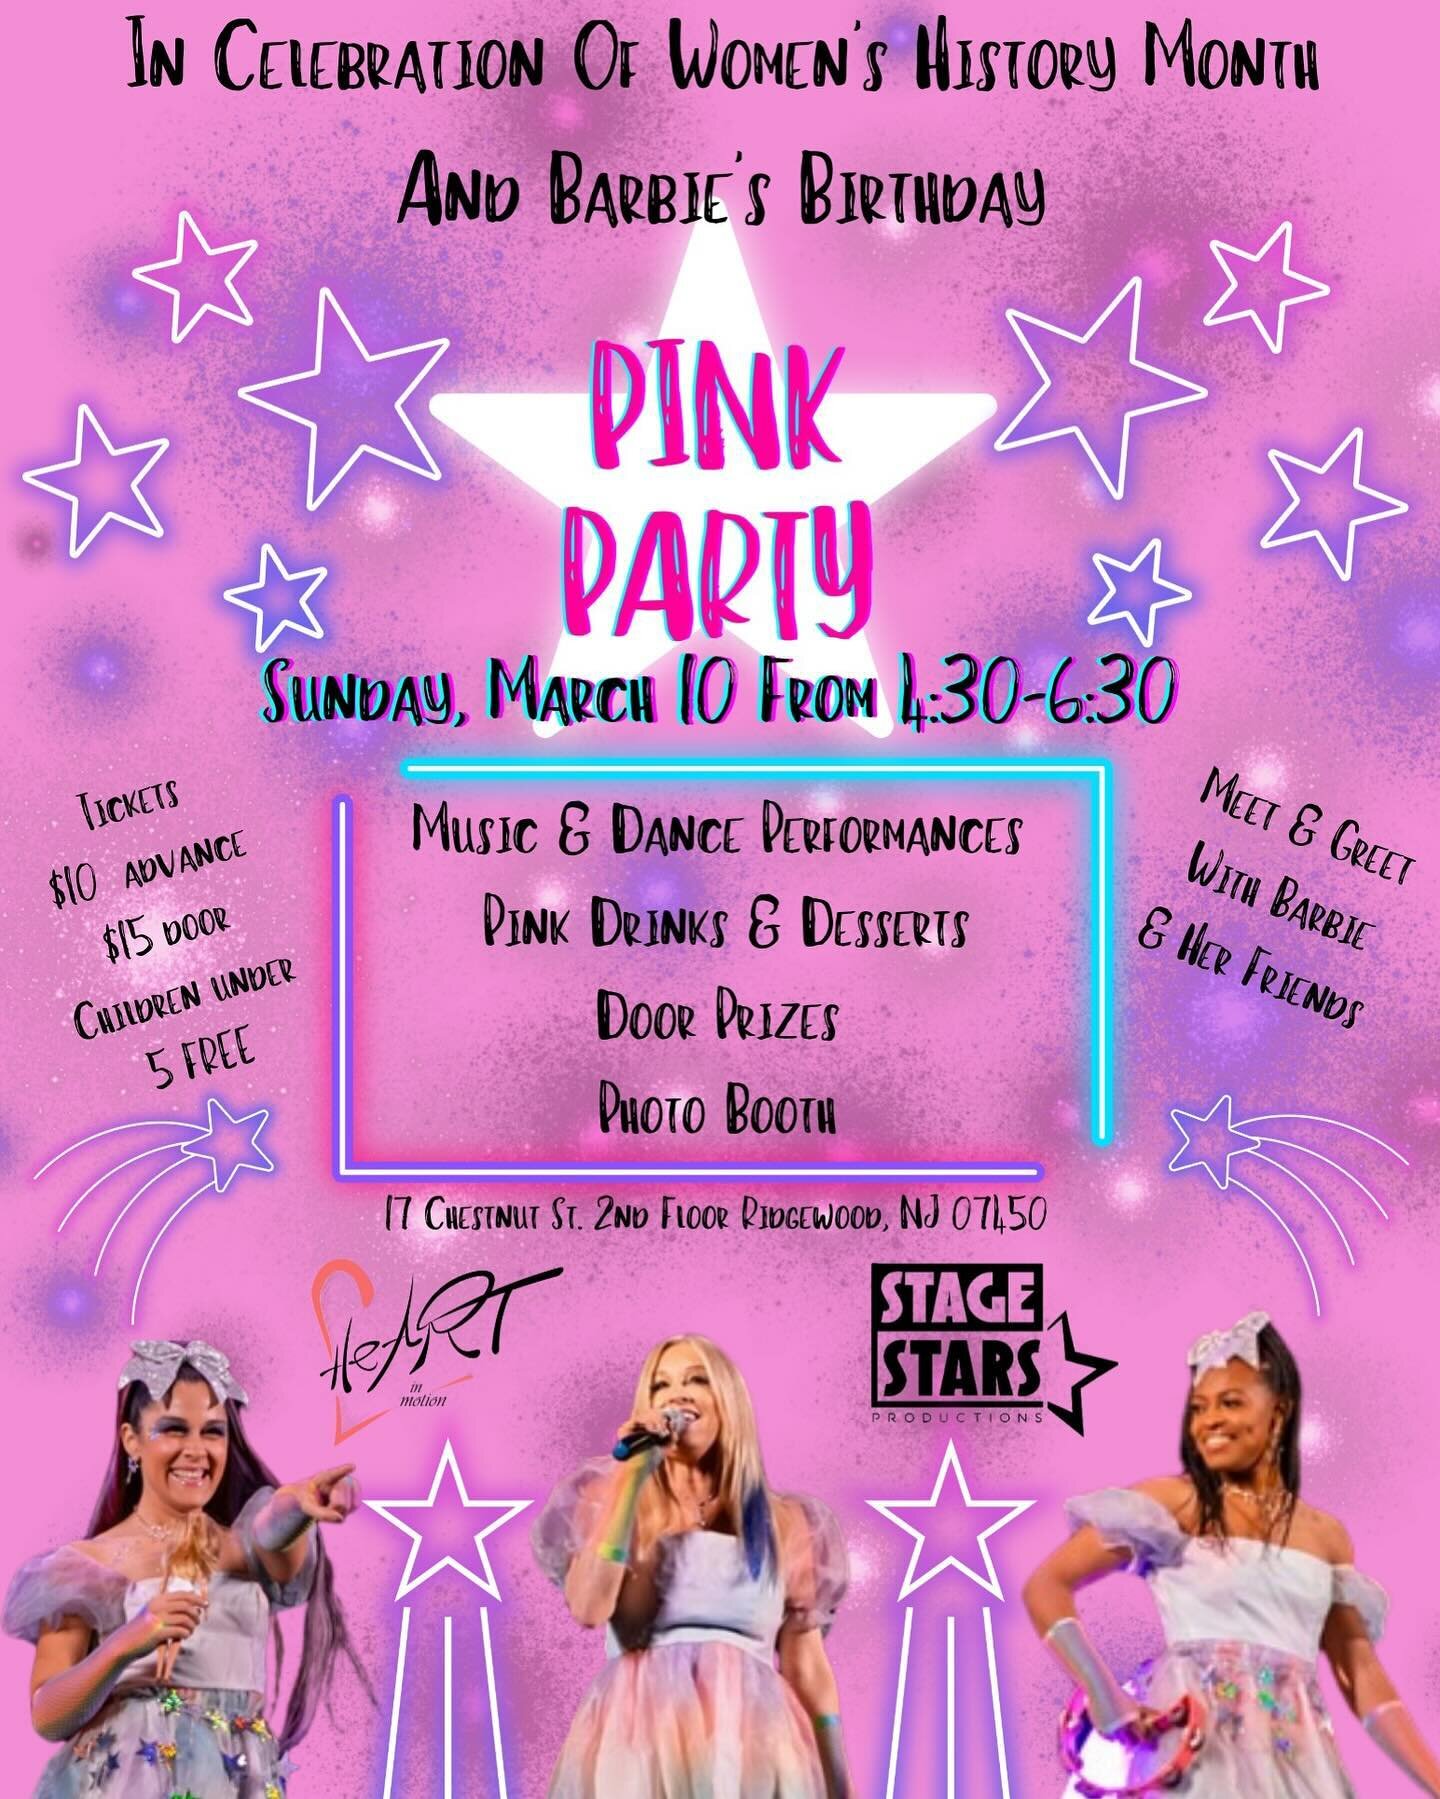 Join us Sunday for a &ldquo;Pink Party&rdquo; including music &amp; dance performances, in celebration of Women's History Month and Barbie's Birthday! There will be a drinks, desserts, prizes, and a magical Meet &amp; Greet with Barbie and her friend